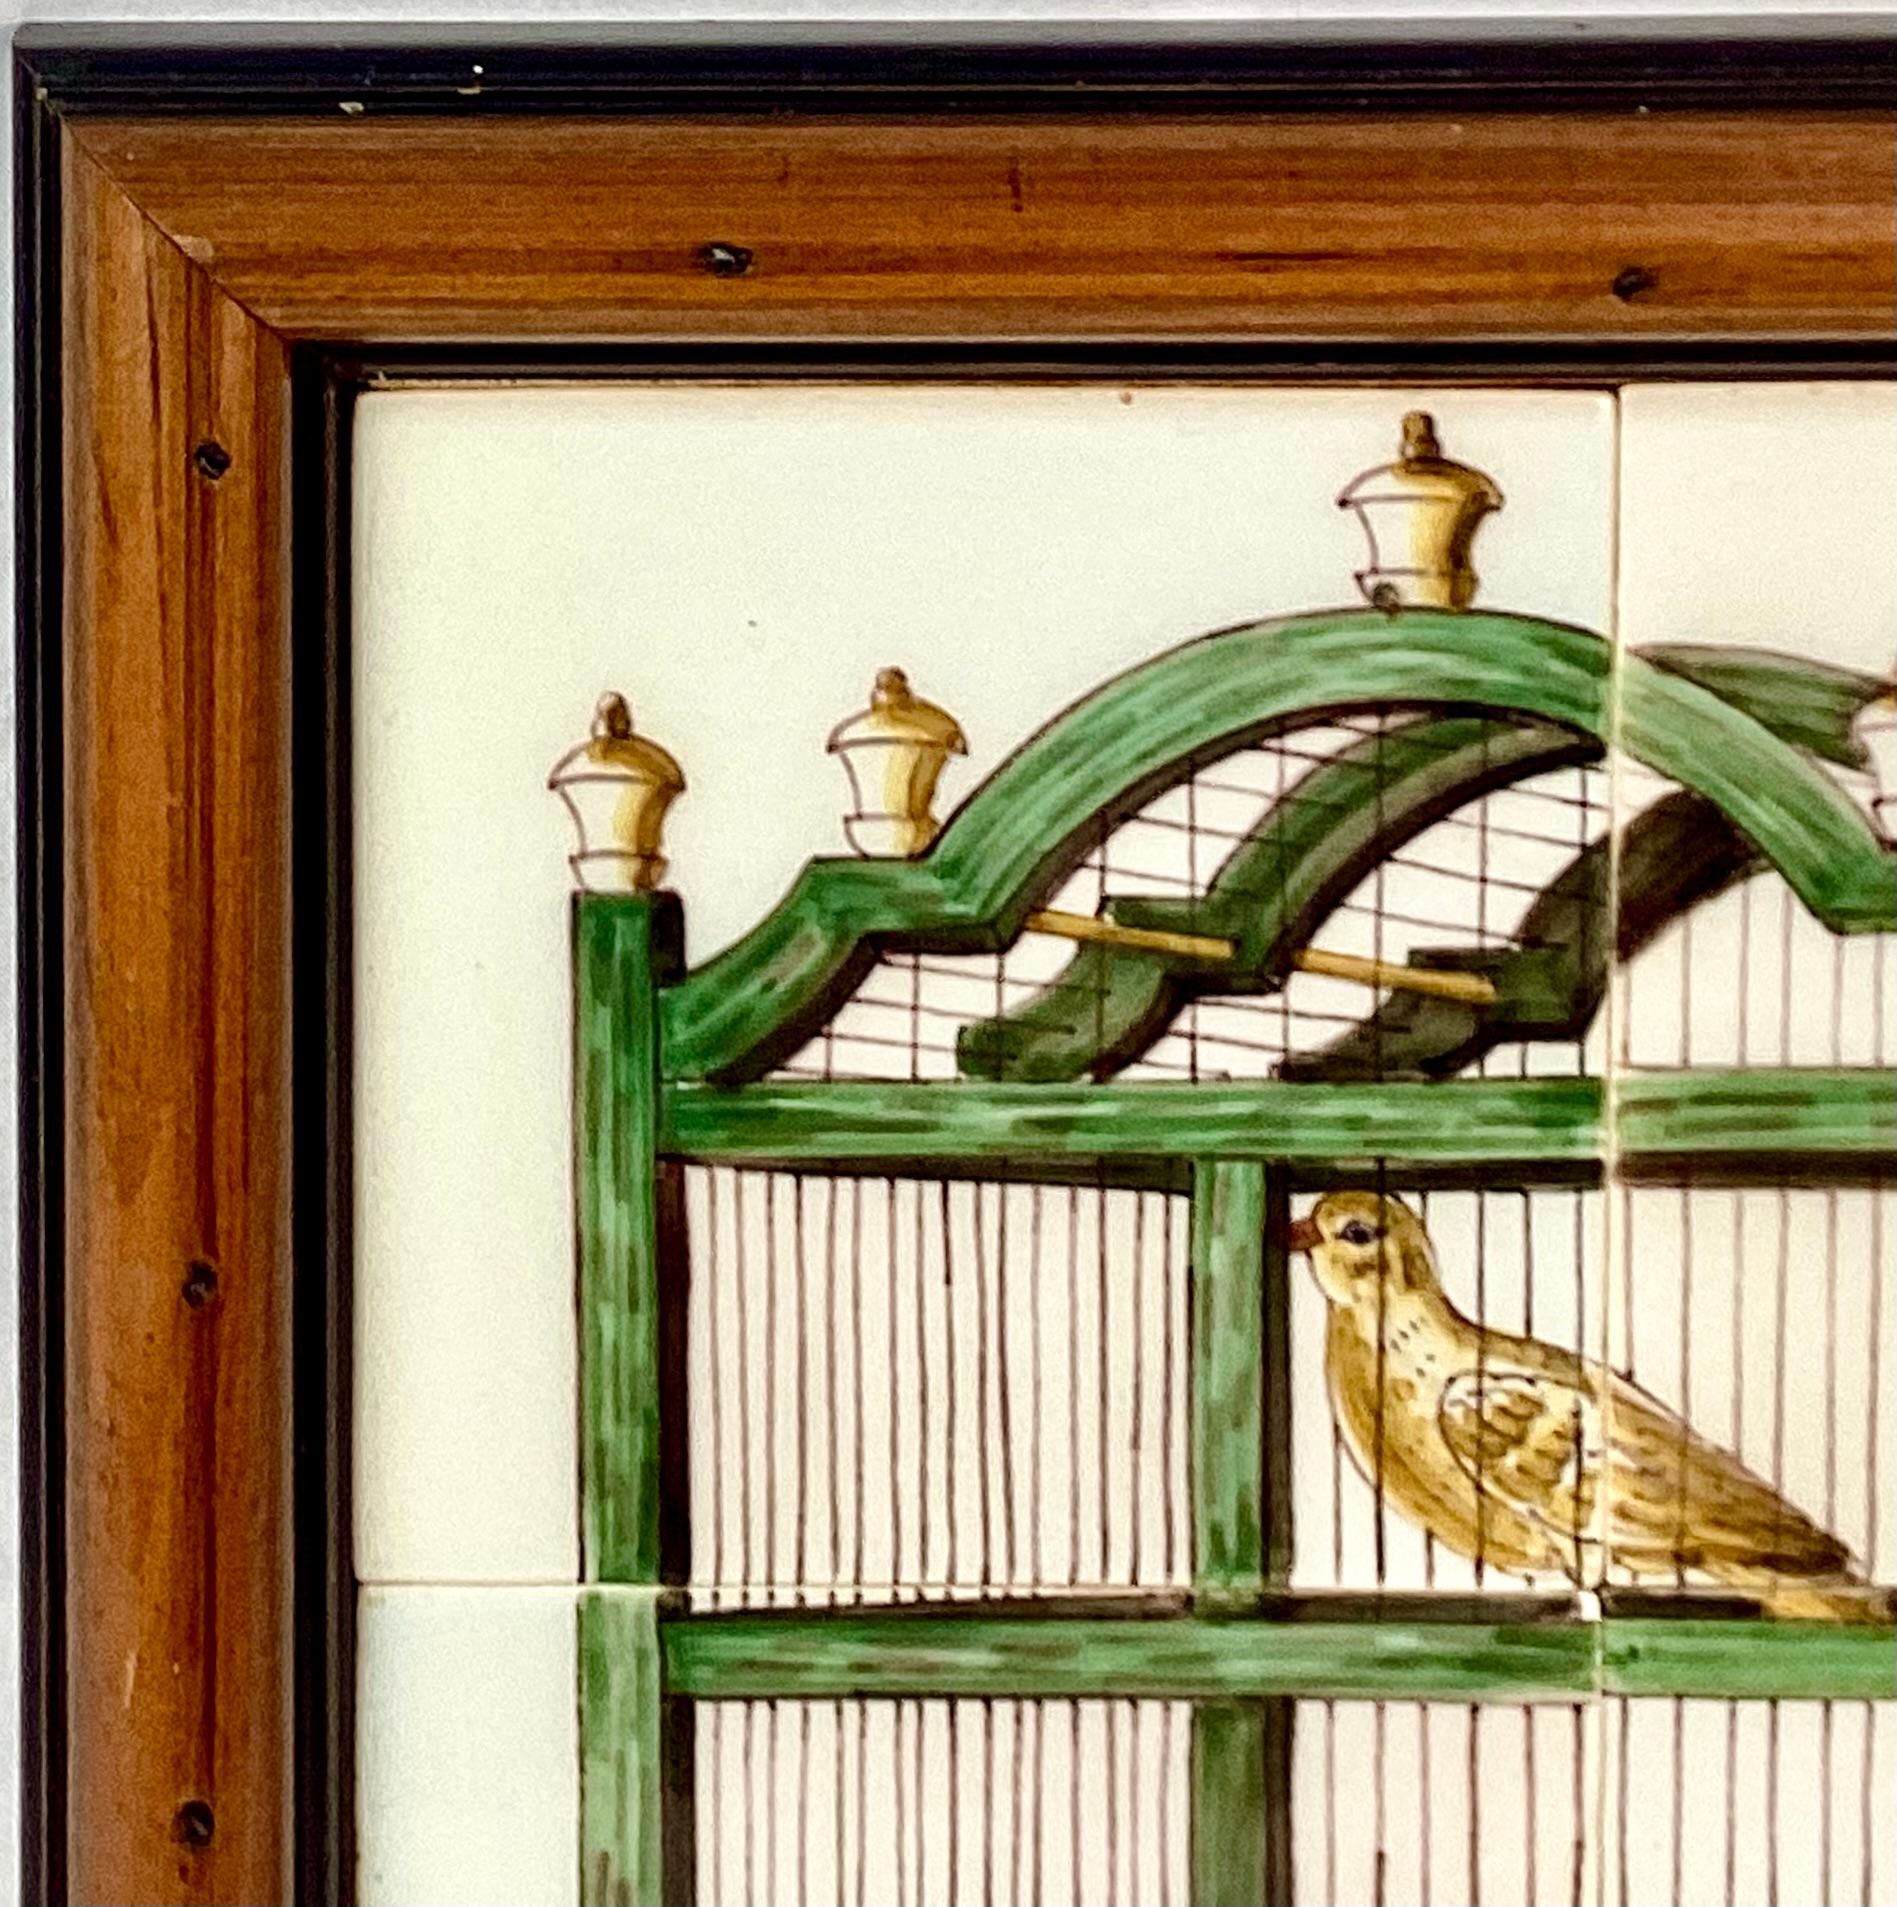 Delft 18th Century style tiles featuring a bird in a cage. Mural has four approximately 5 x 5 tiles. These are painted with a green bird cage and yellow bird perched inside with yellow finials and a blue water bowl mounted in a custom wood frame. 